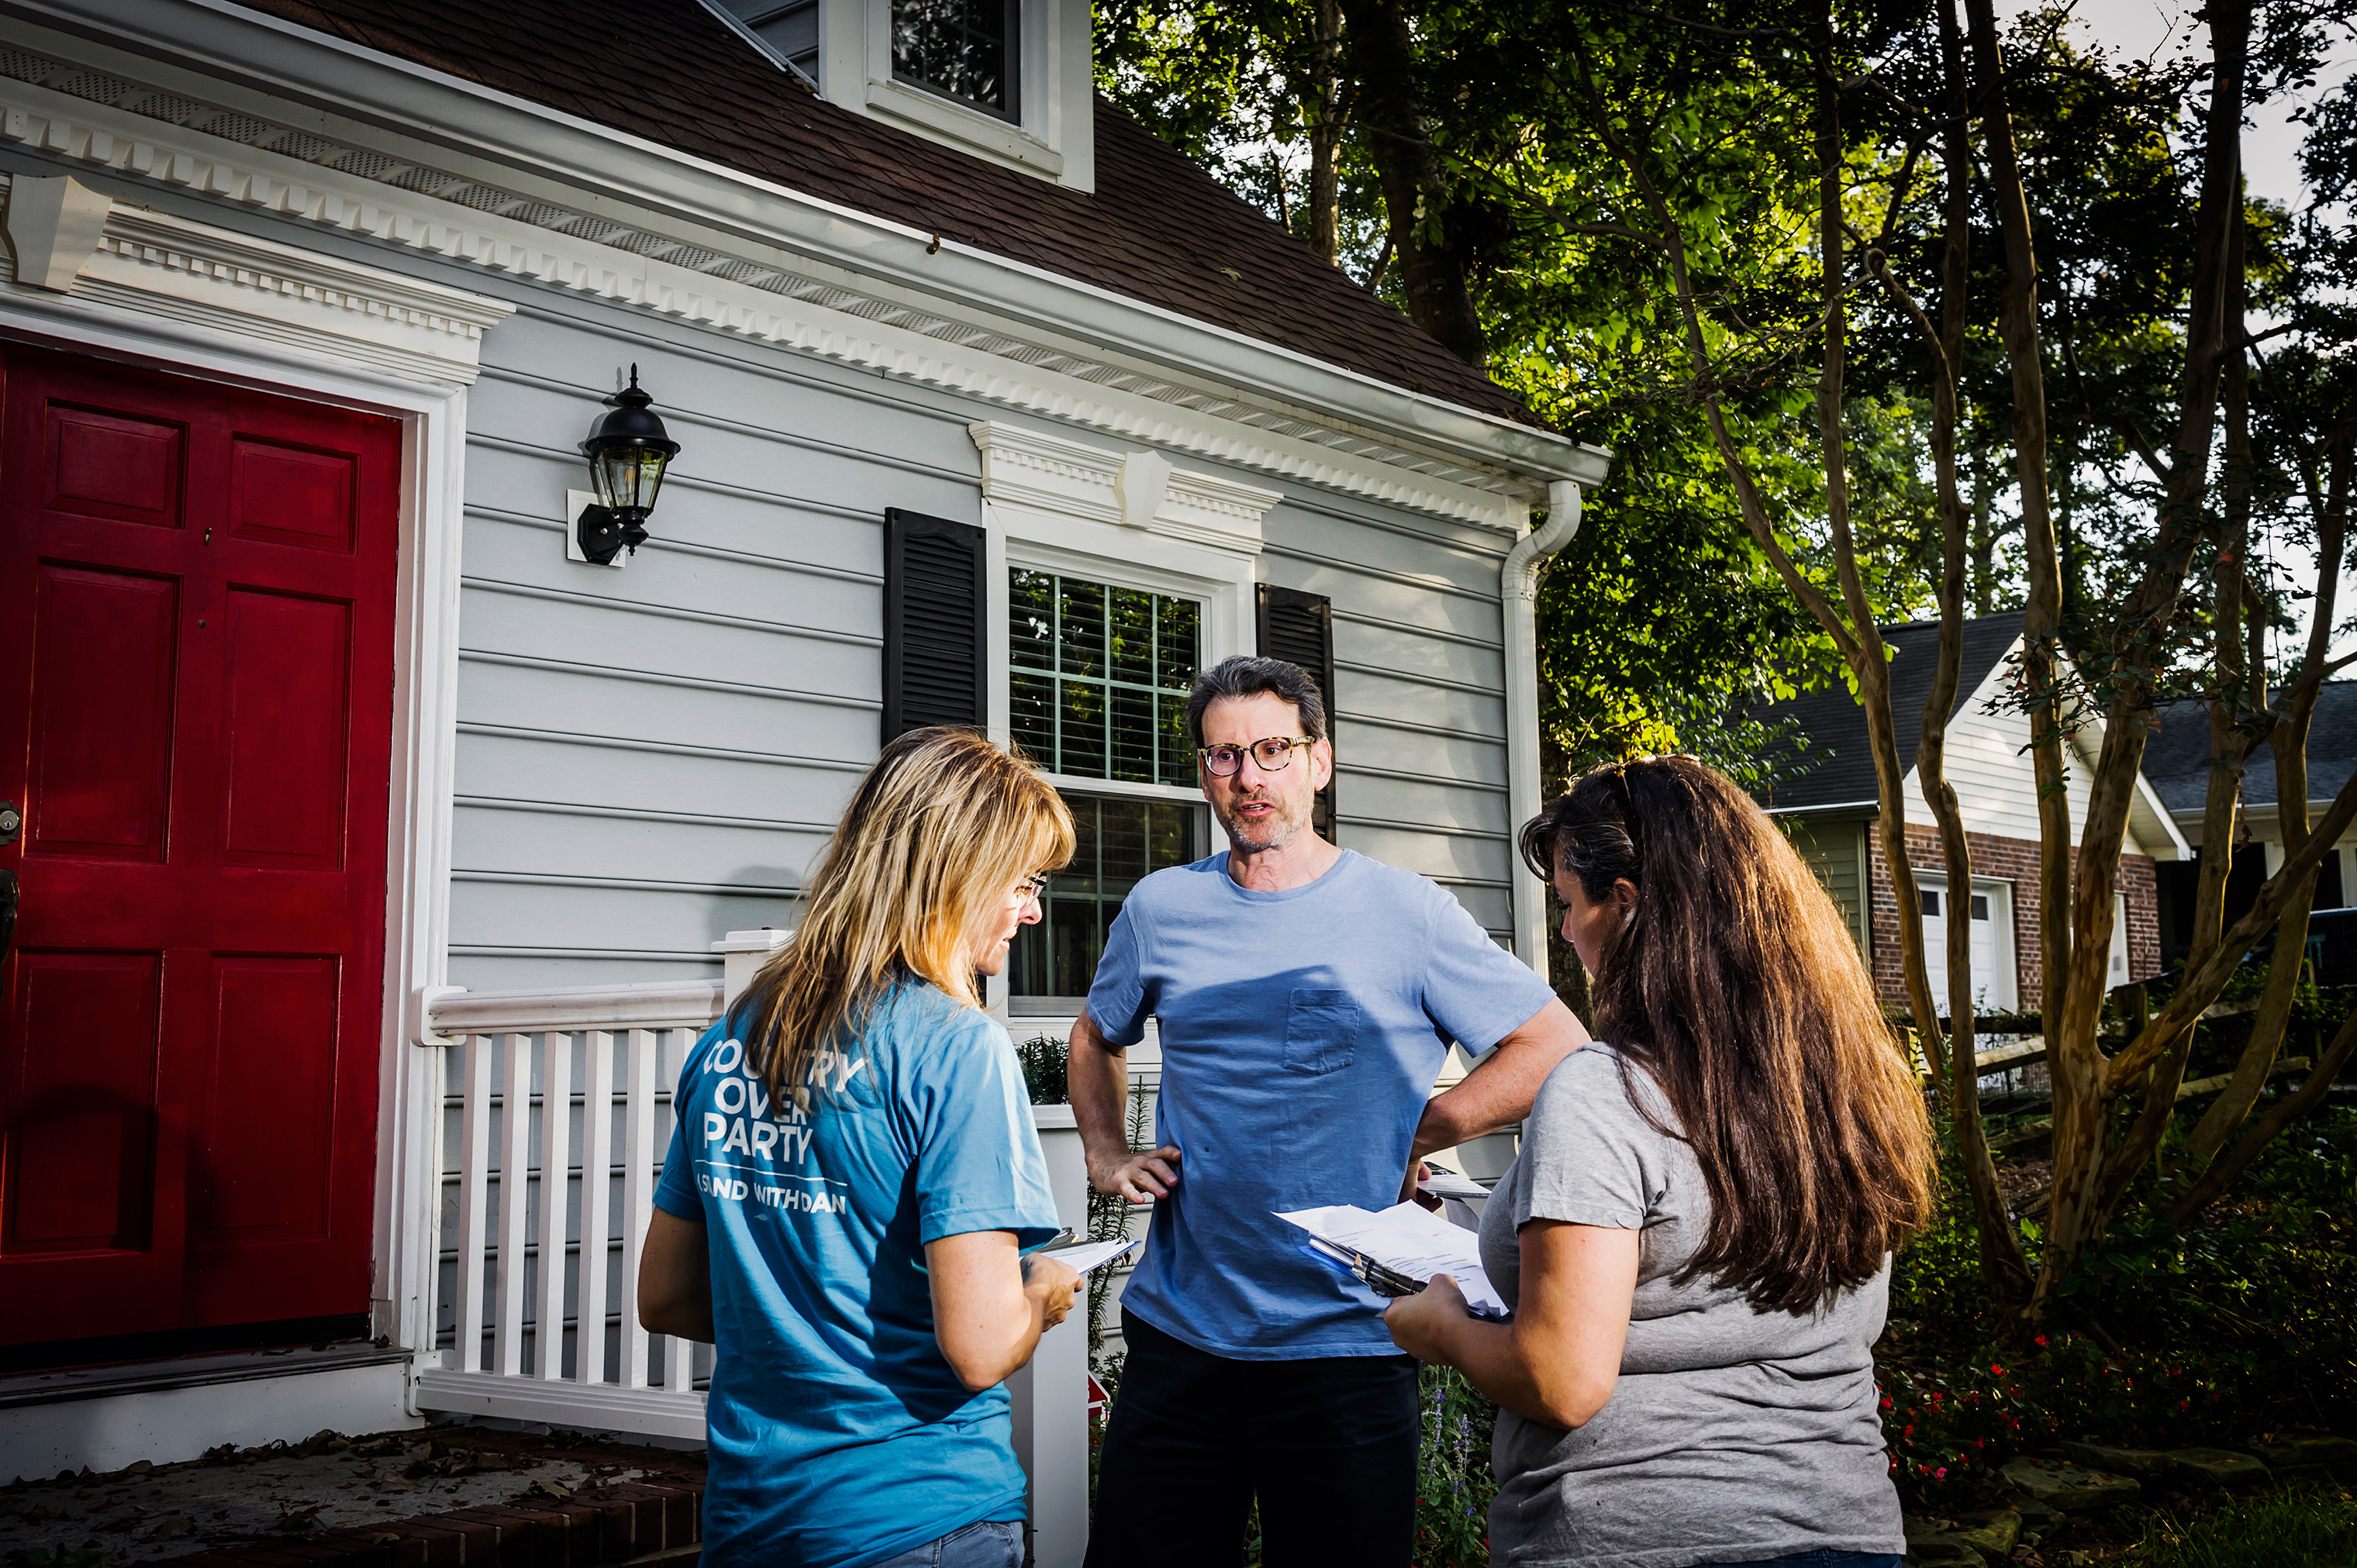 Eberly and her group’s co-founder, Ava Williamson, canvass for Democrat Dan McCready in North Carolina’s 9th House district. (Dina Litovsky—Redux for TIME)